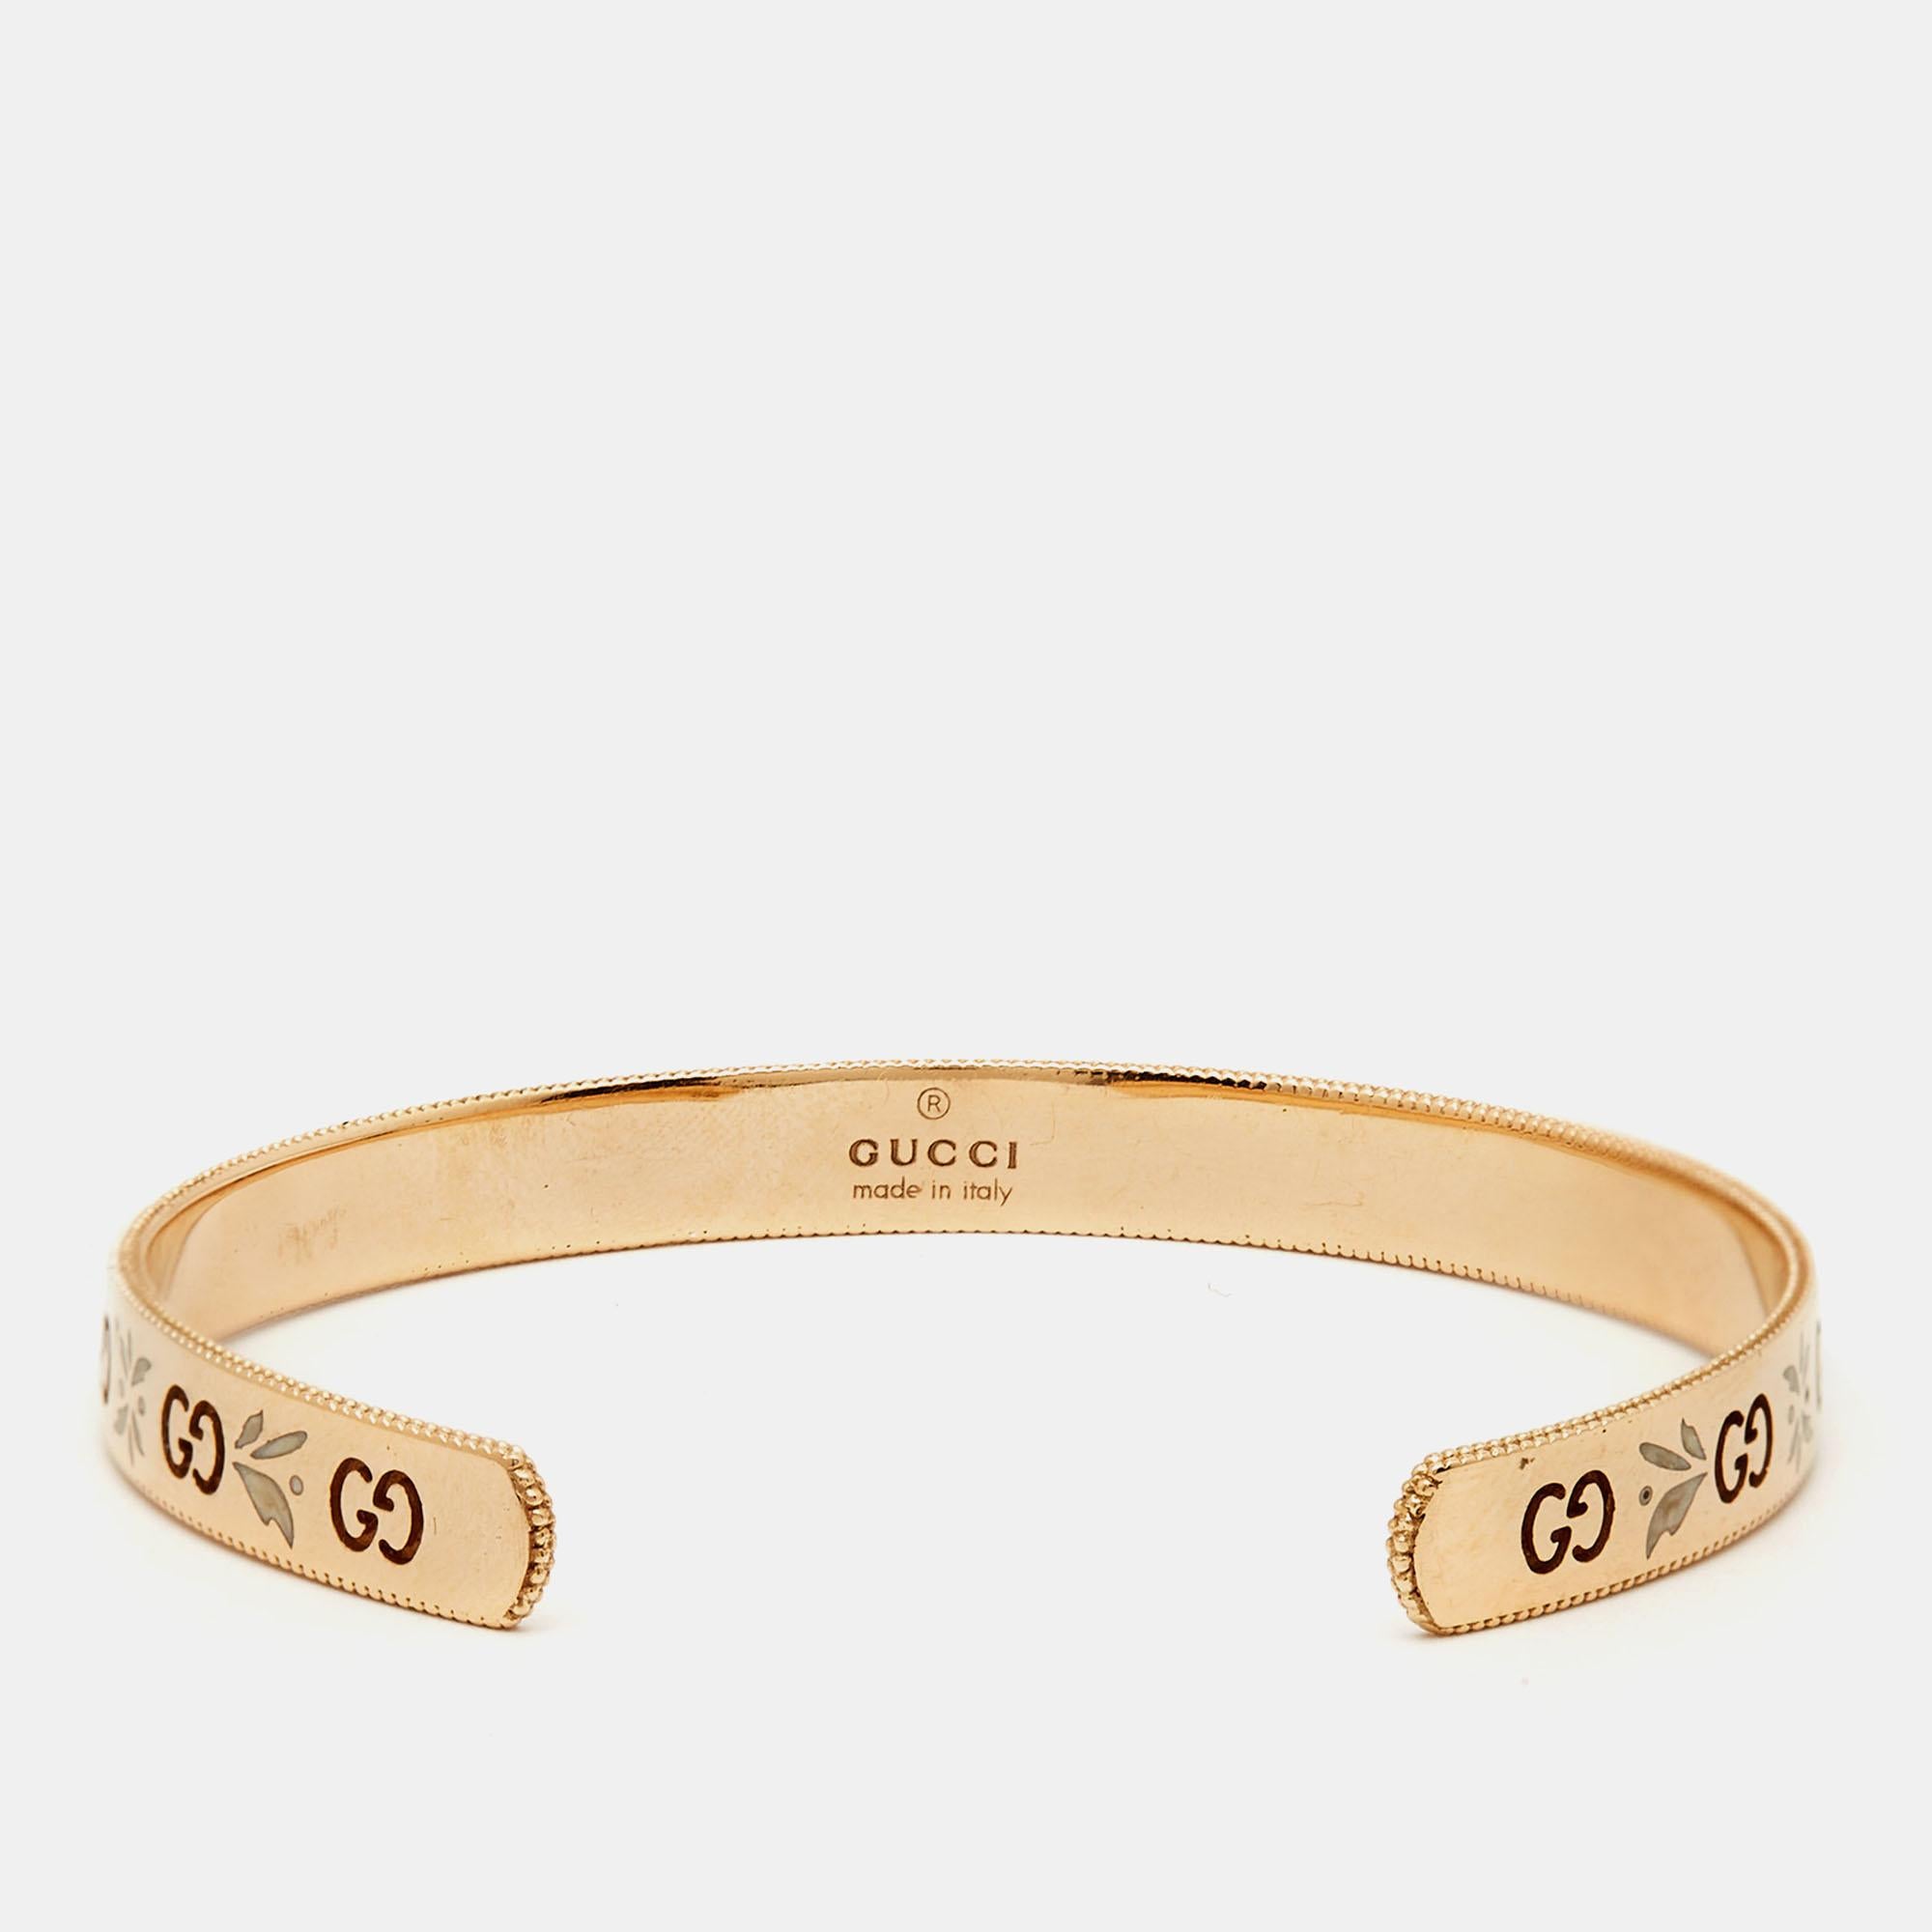 Embrace the timeless allure of the Gucci bracelet. Crafted with meticulous attention to detail, this exquisite piece combines luxurious 18k rose gold with delicate enamel blooms and GG logos, creating a captivating harmony of elegance and modernity.